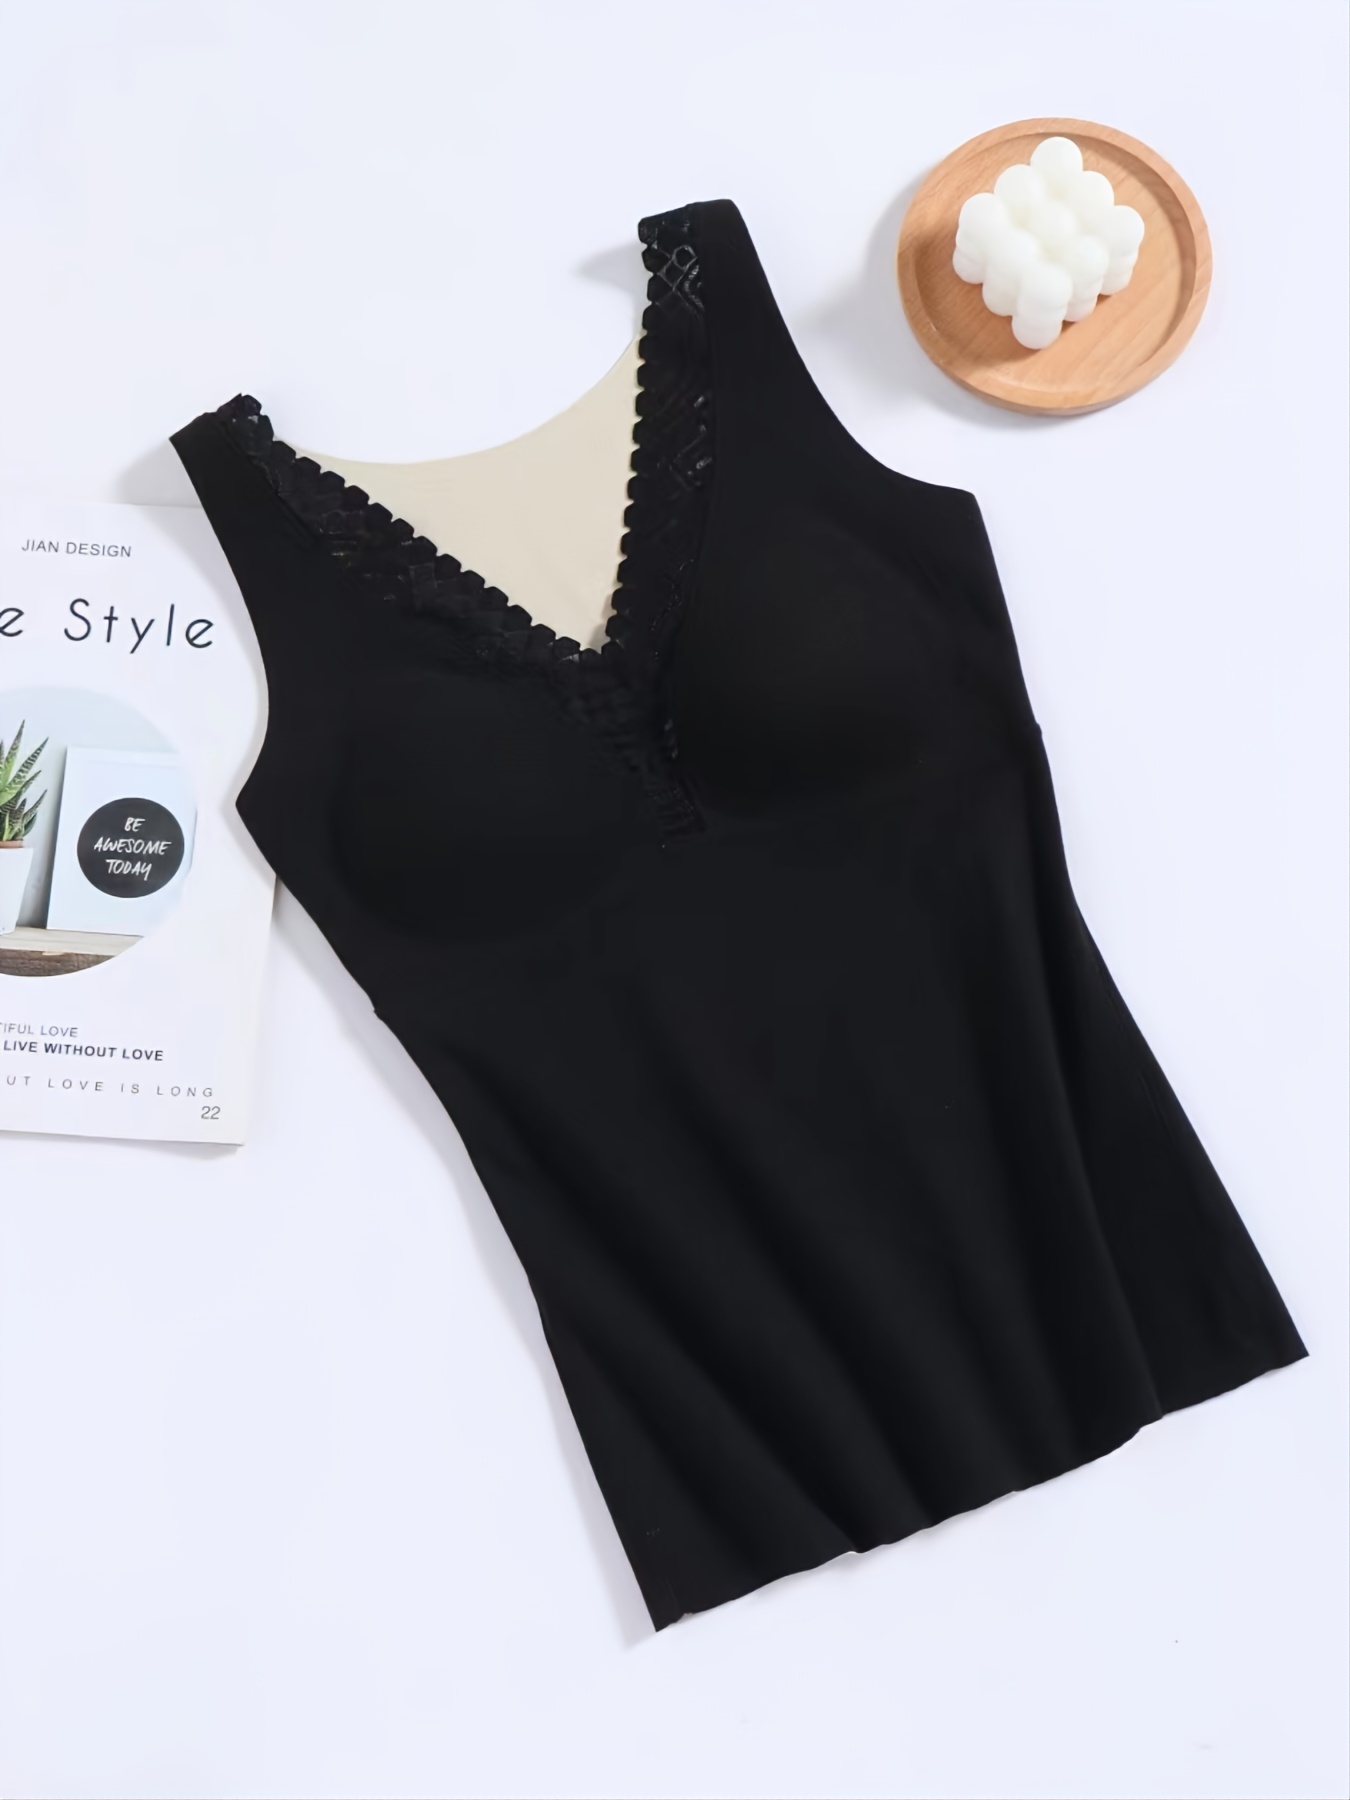 Winter Thermal Lace V Neck Camisole Top With Lace For Women Slim Body  Shaper Camisole With Sleeveless Vest And Bra X404 From Shizier, $17.26